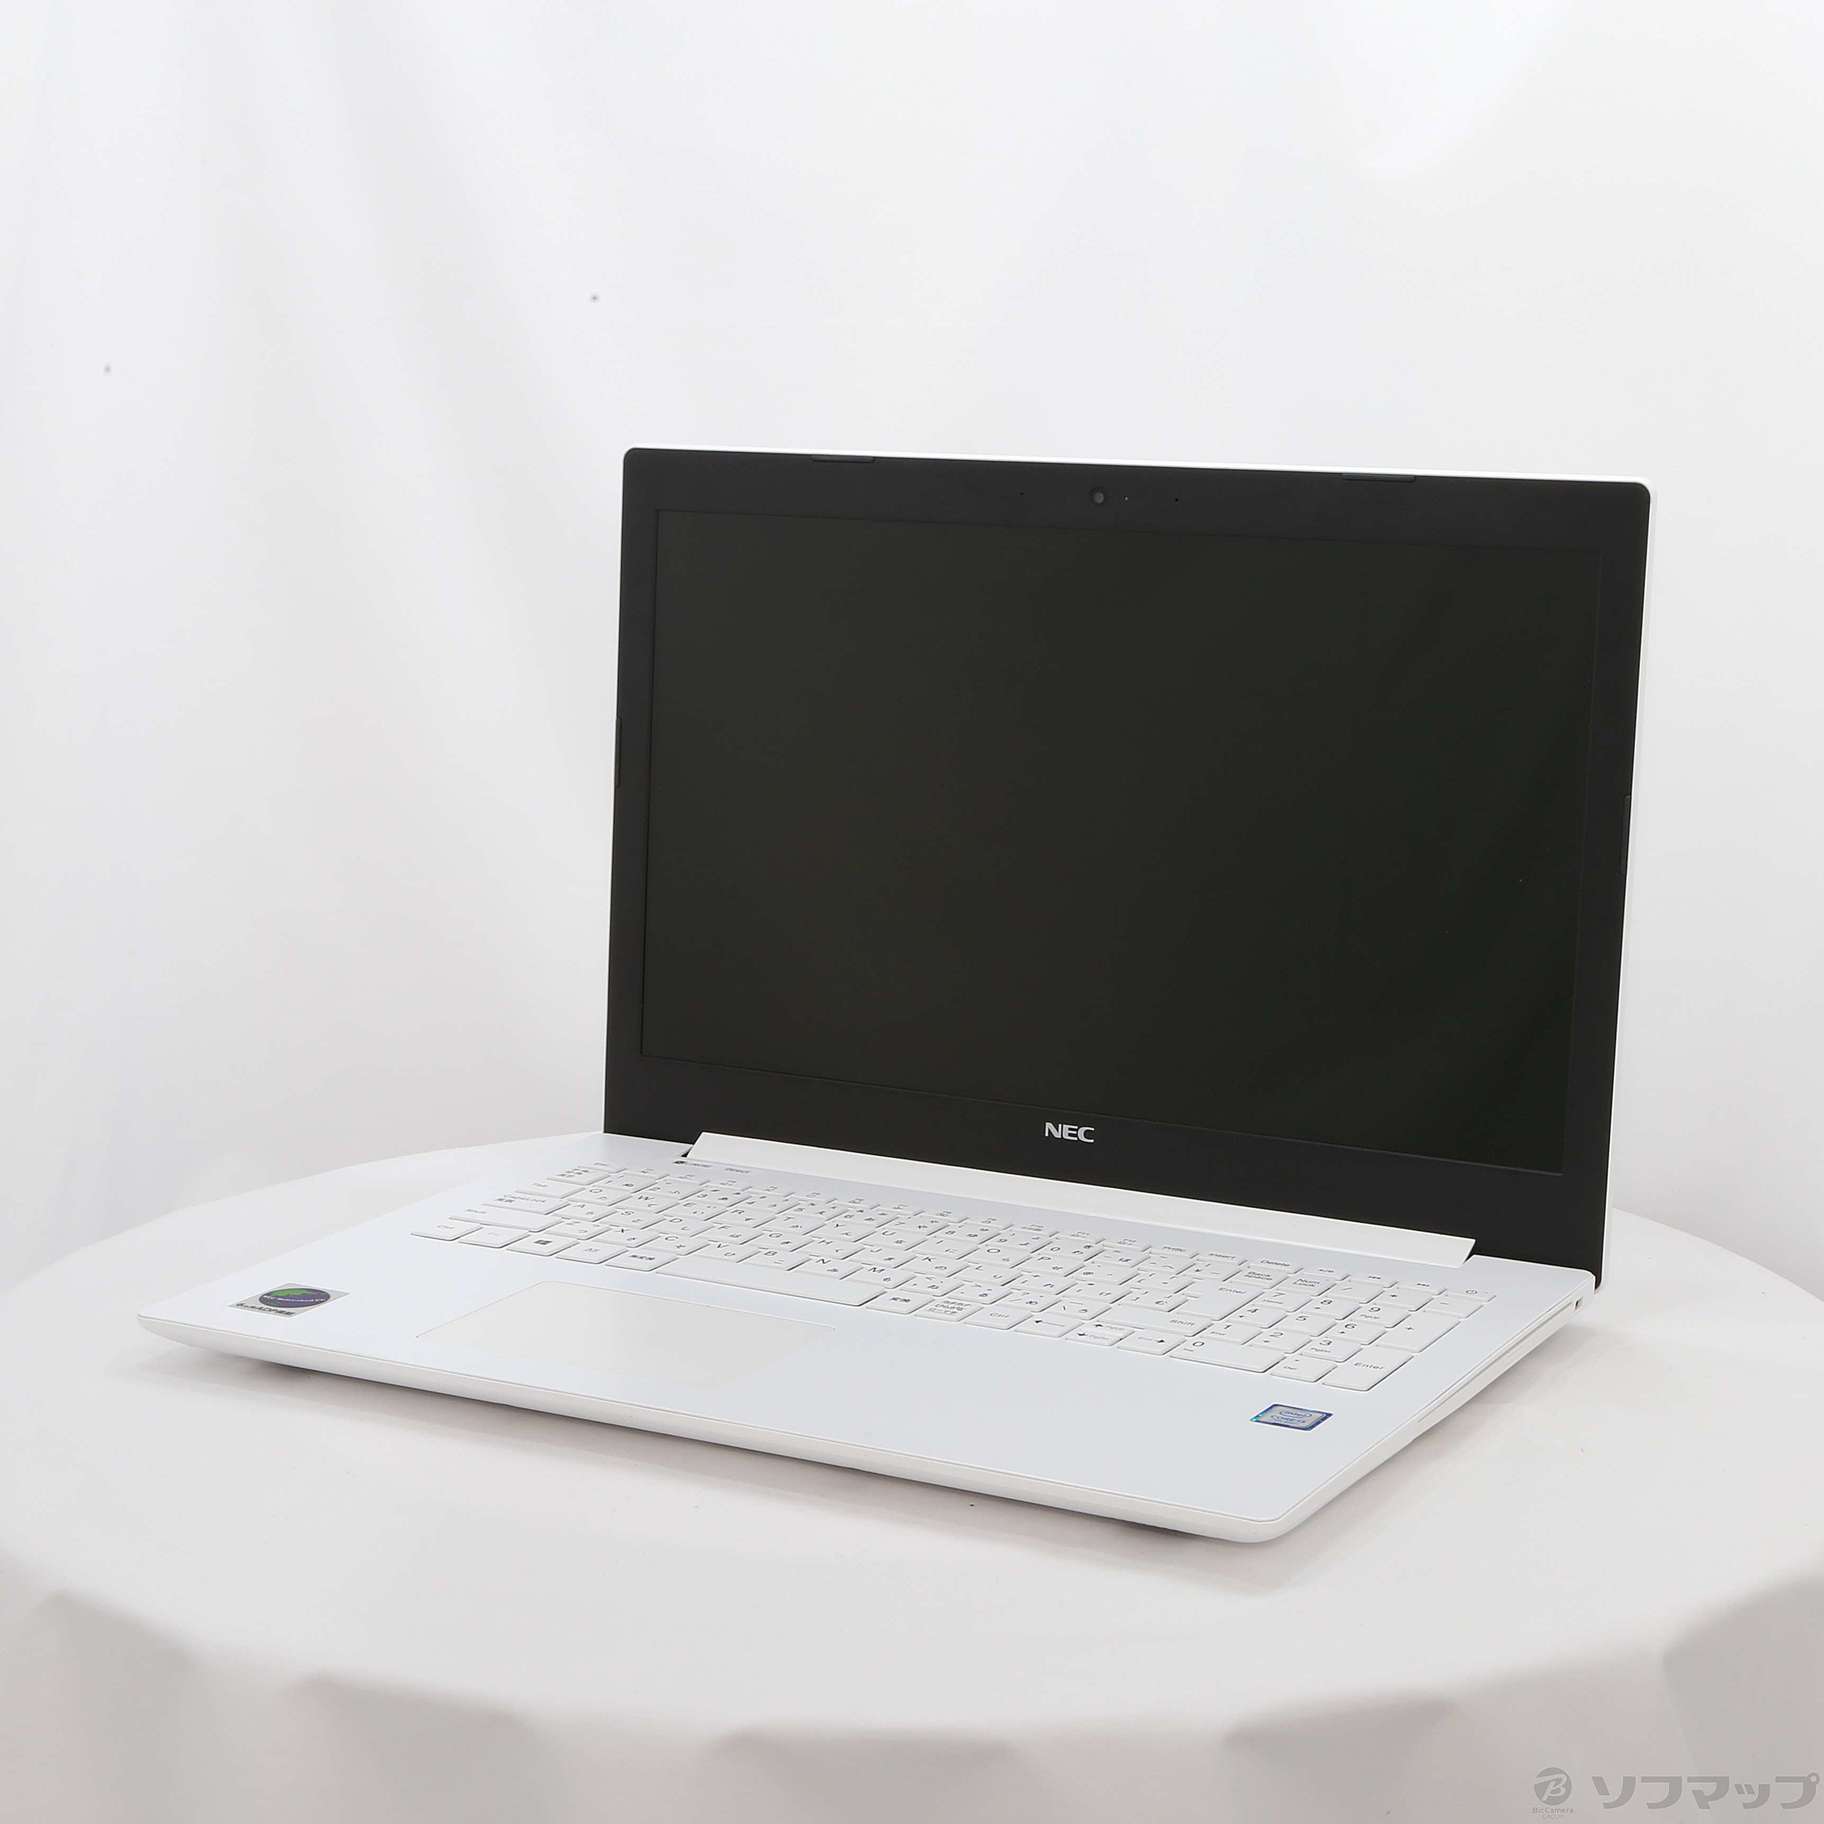 LAVIE Direct NS PC-GN232FDAD 〔NEC Refreshed PC〕 〔Windows 10〕 ≪メーカー保証あり≫